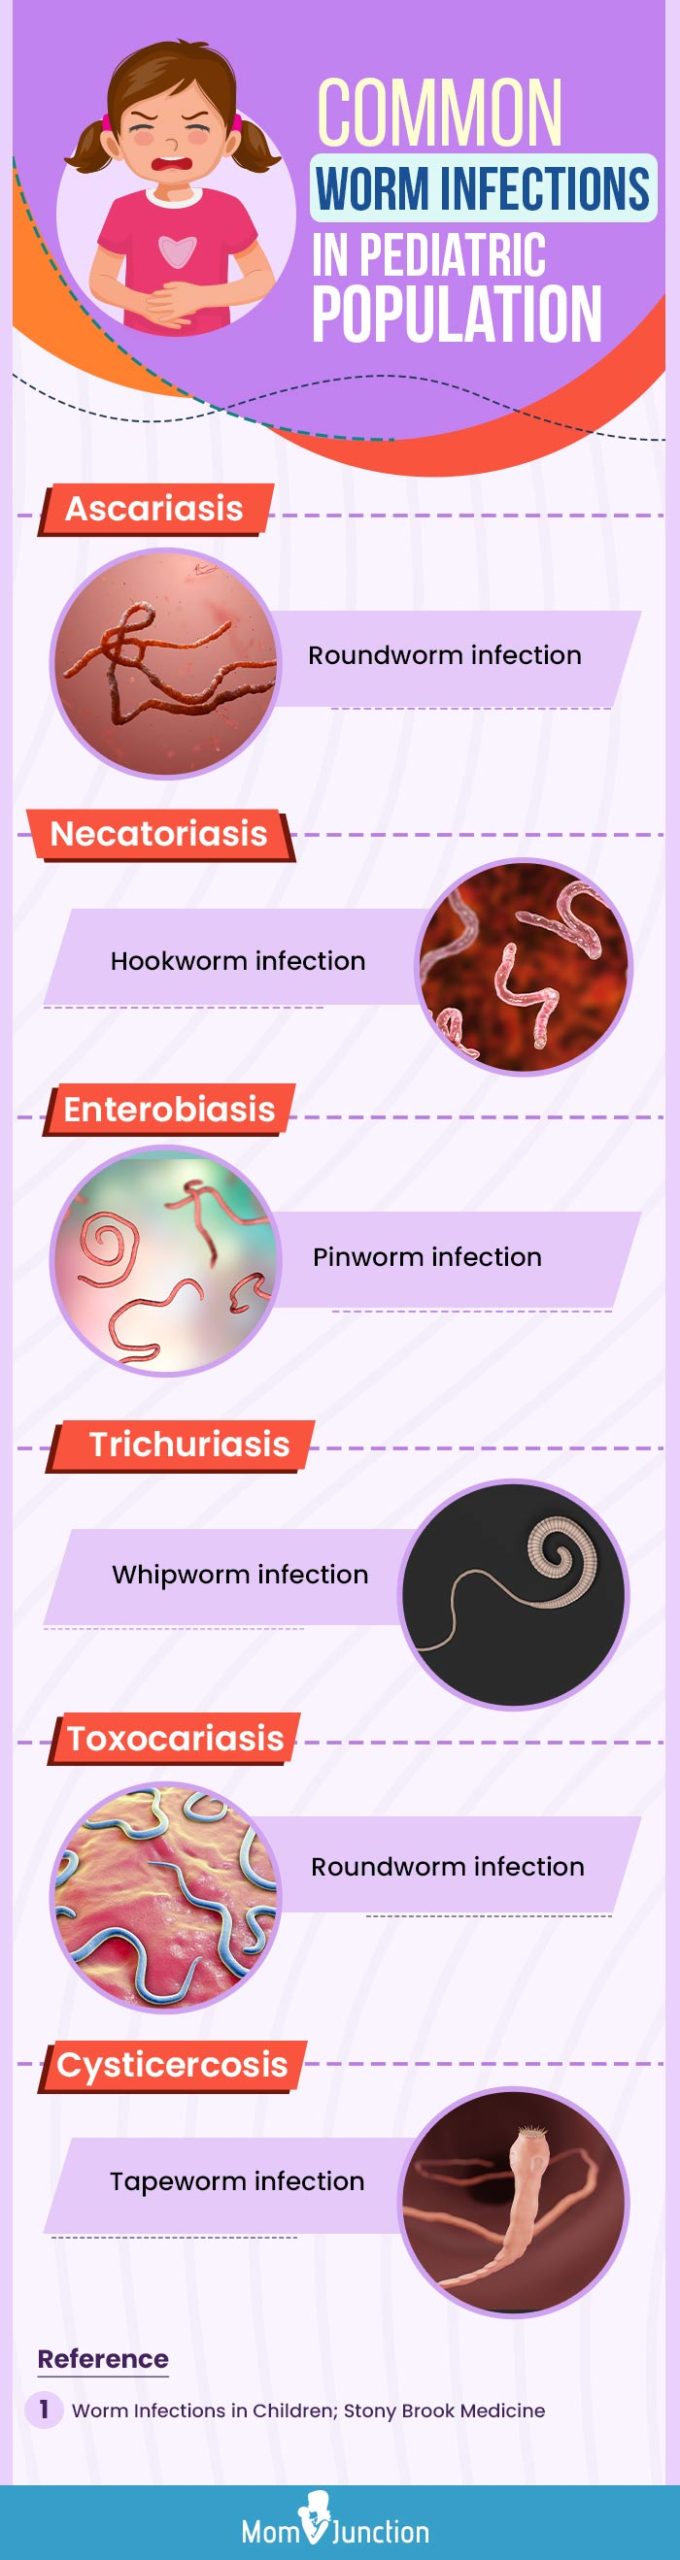 worm infections in children [infographic]